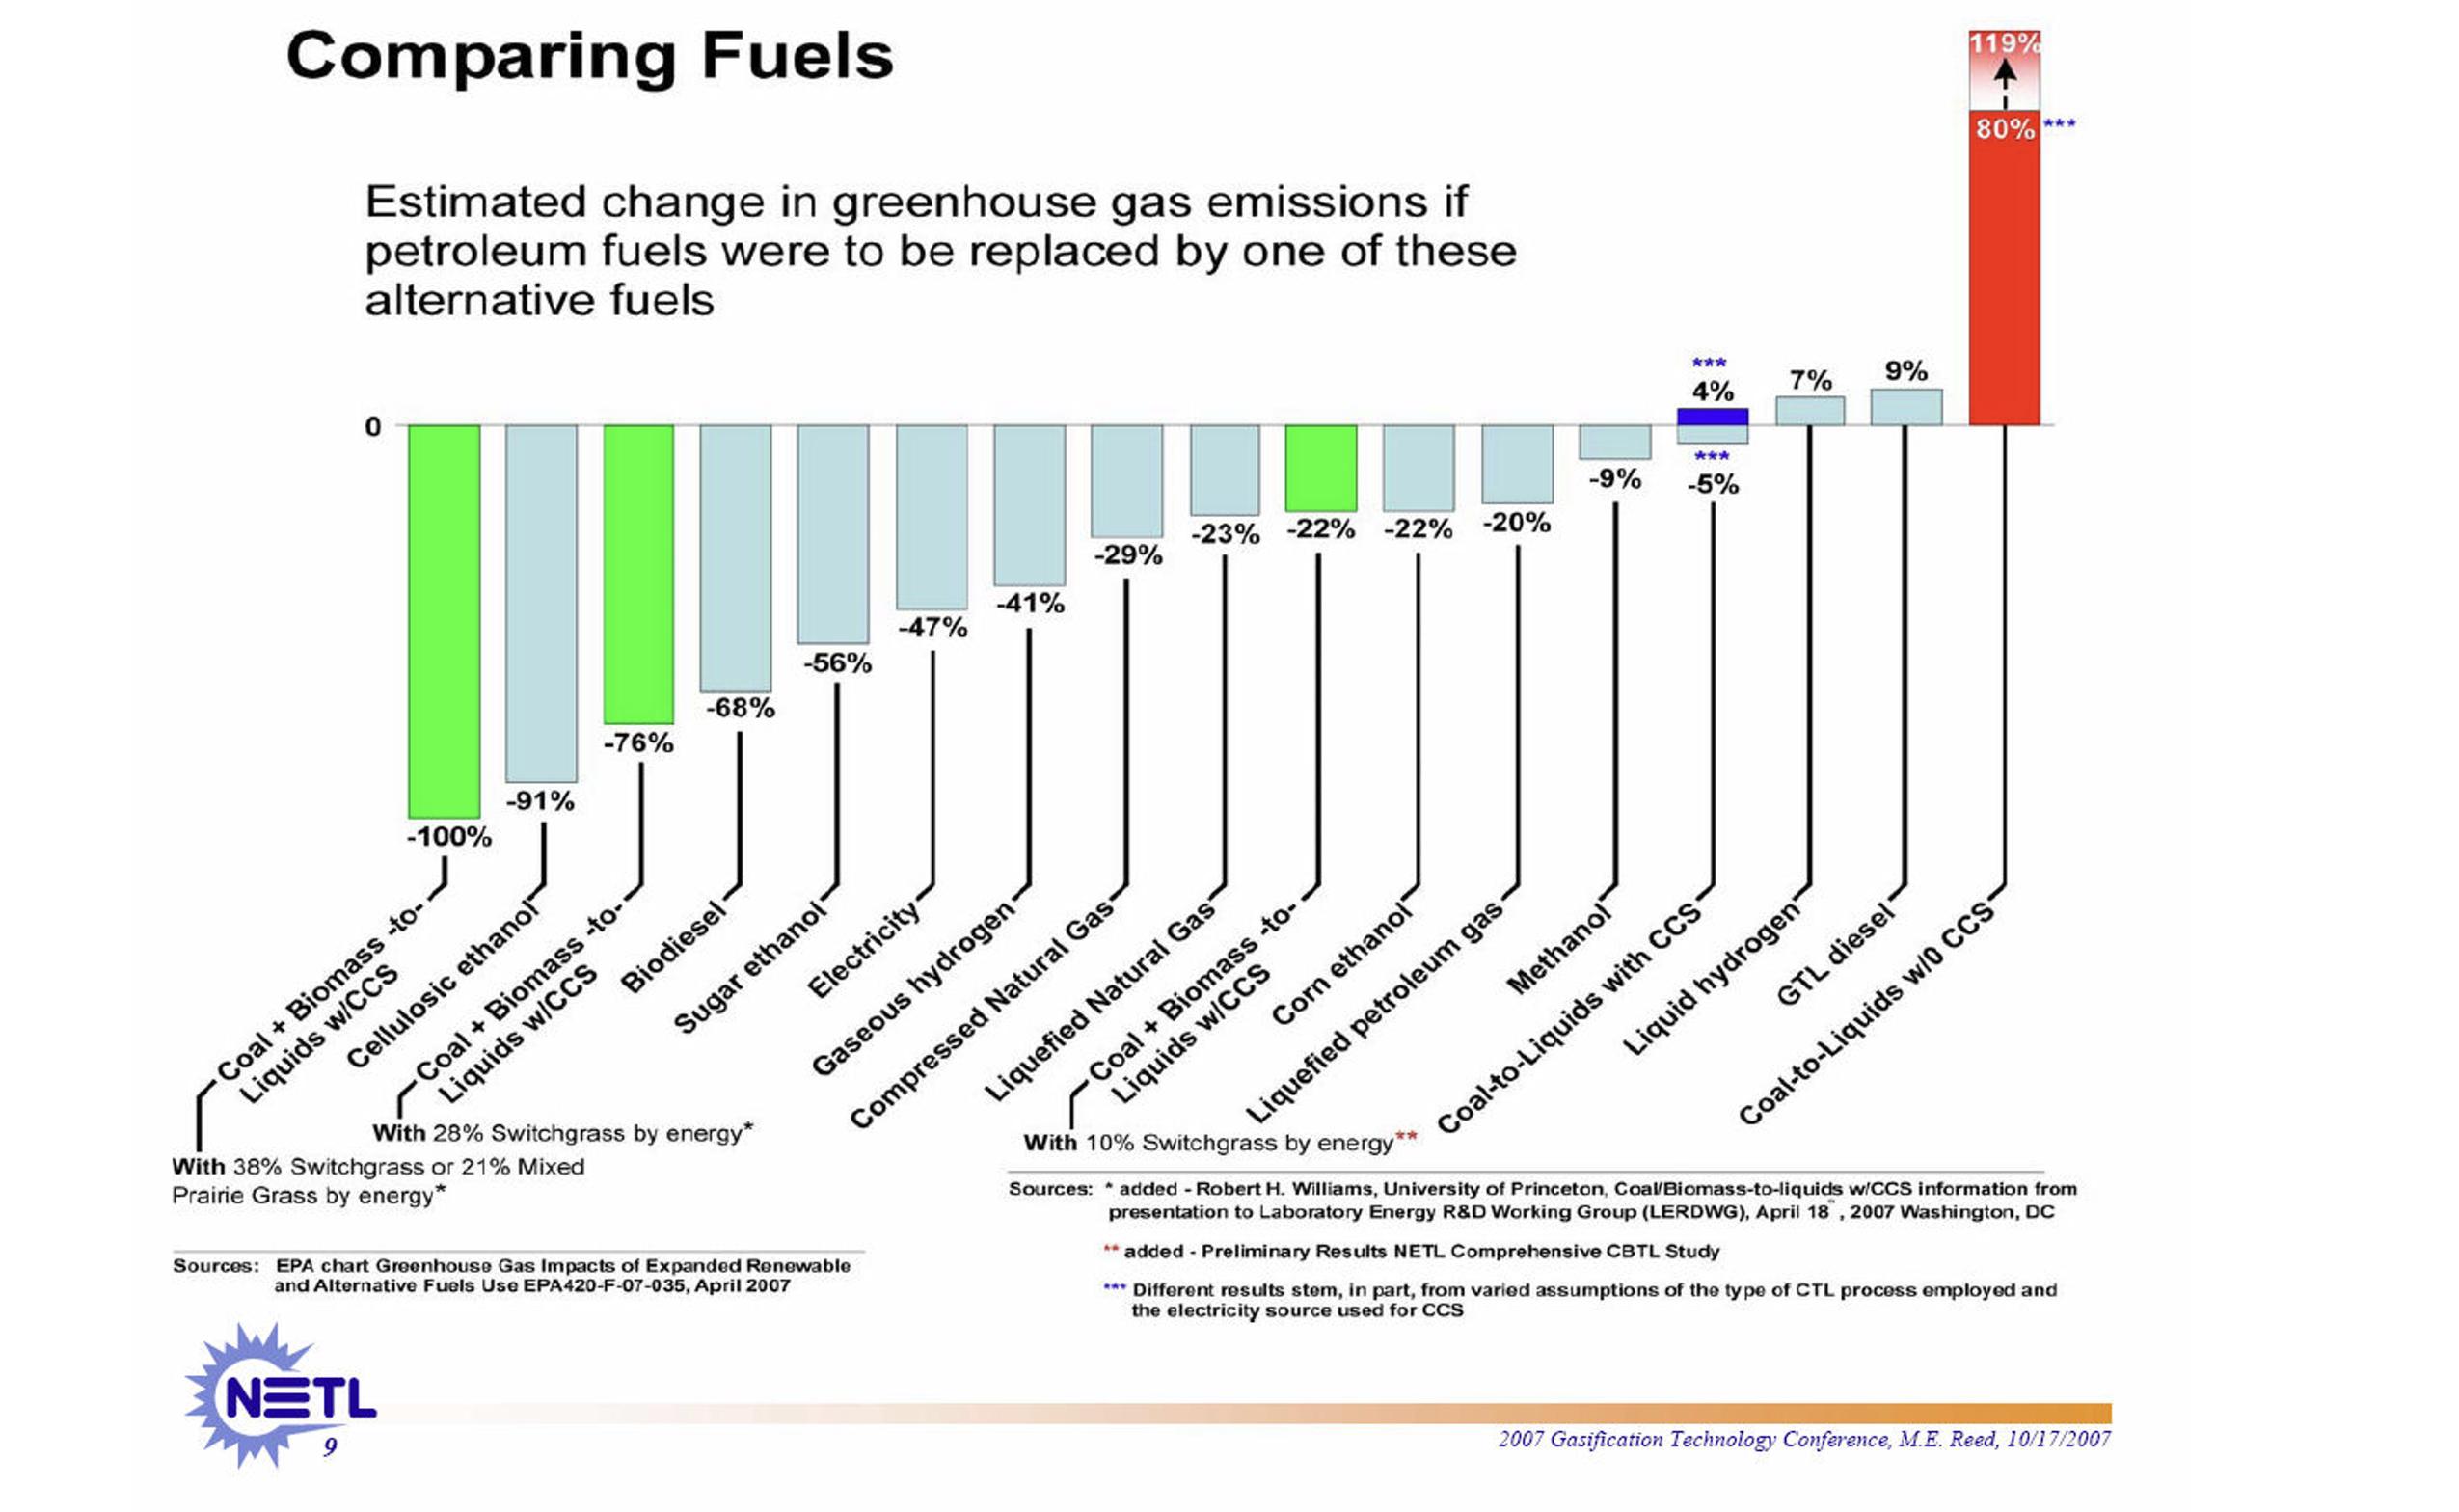 Estimated change in emissions by replacing petroleum fuels